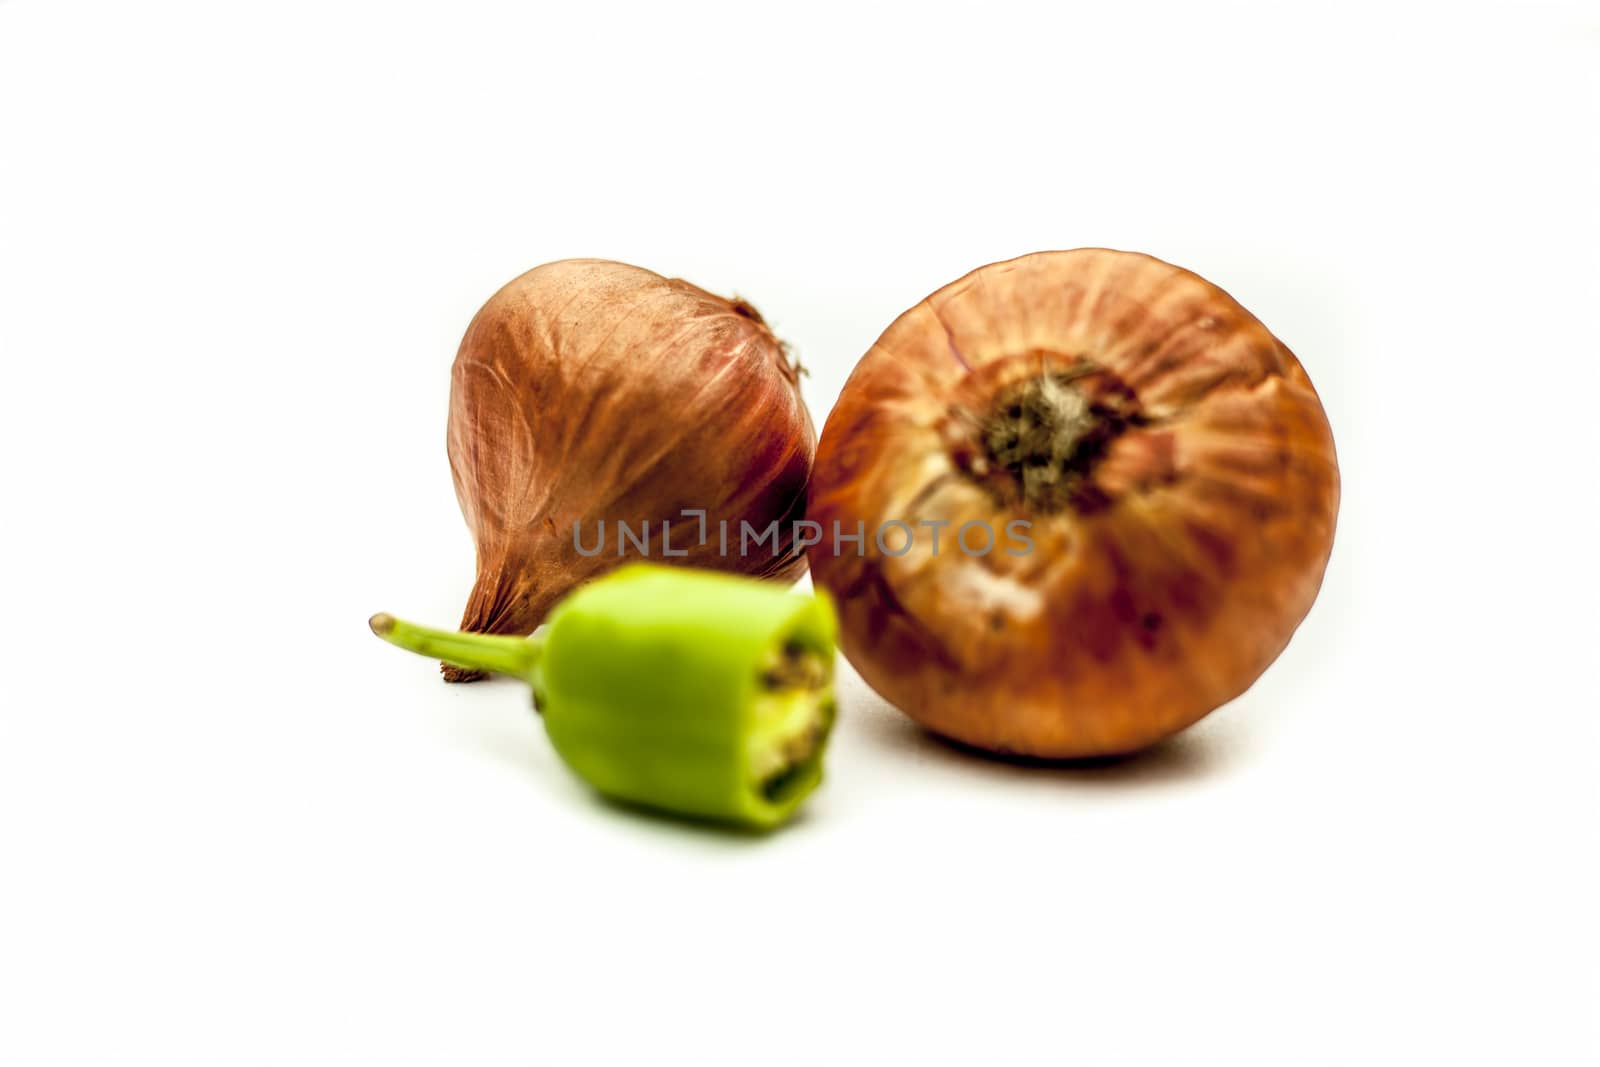 Raw organic two vegetables isolated on white which are onion or pyaaj or pyaaz along with cut chili or hari mirchi or lili mirchi.